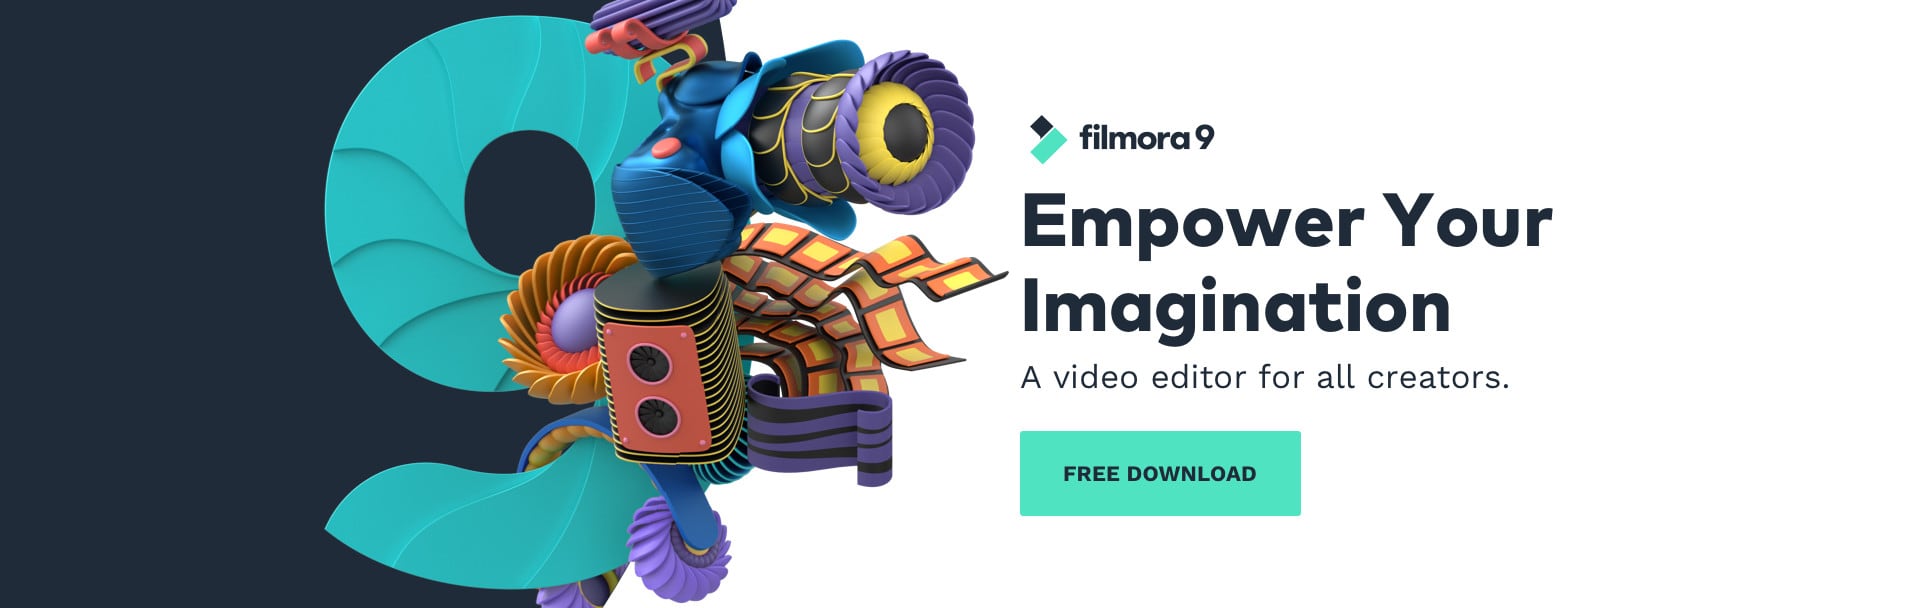 Filmora9 lets you edit video like a pro for fraction of the price